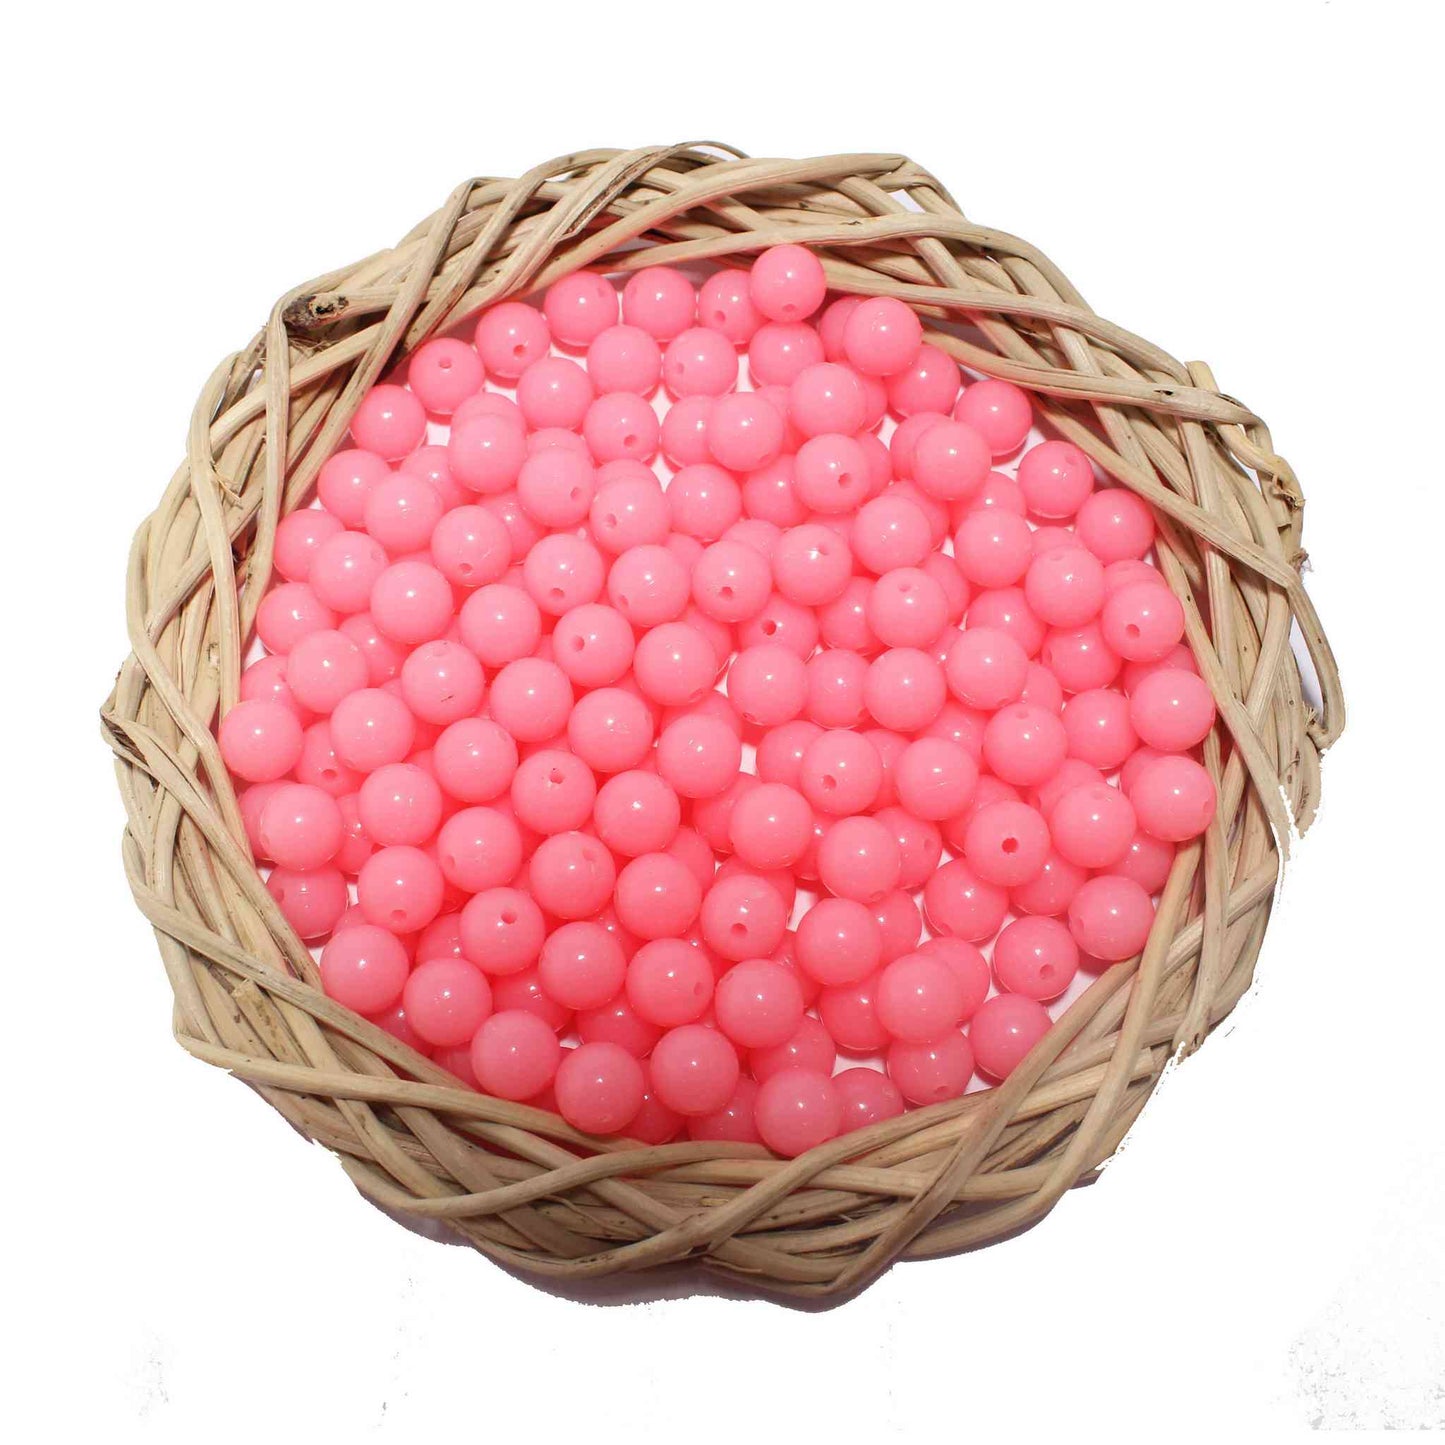 Indian Petals Premium quality Round Glass Beads for DIY Craft, Trousseau Packing or Decoration - Design 734, Light Pink - Indian Petals